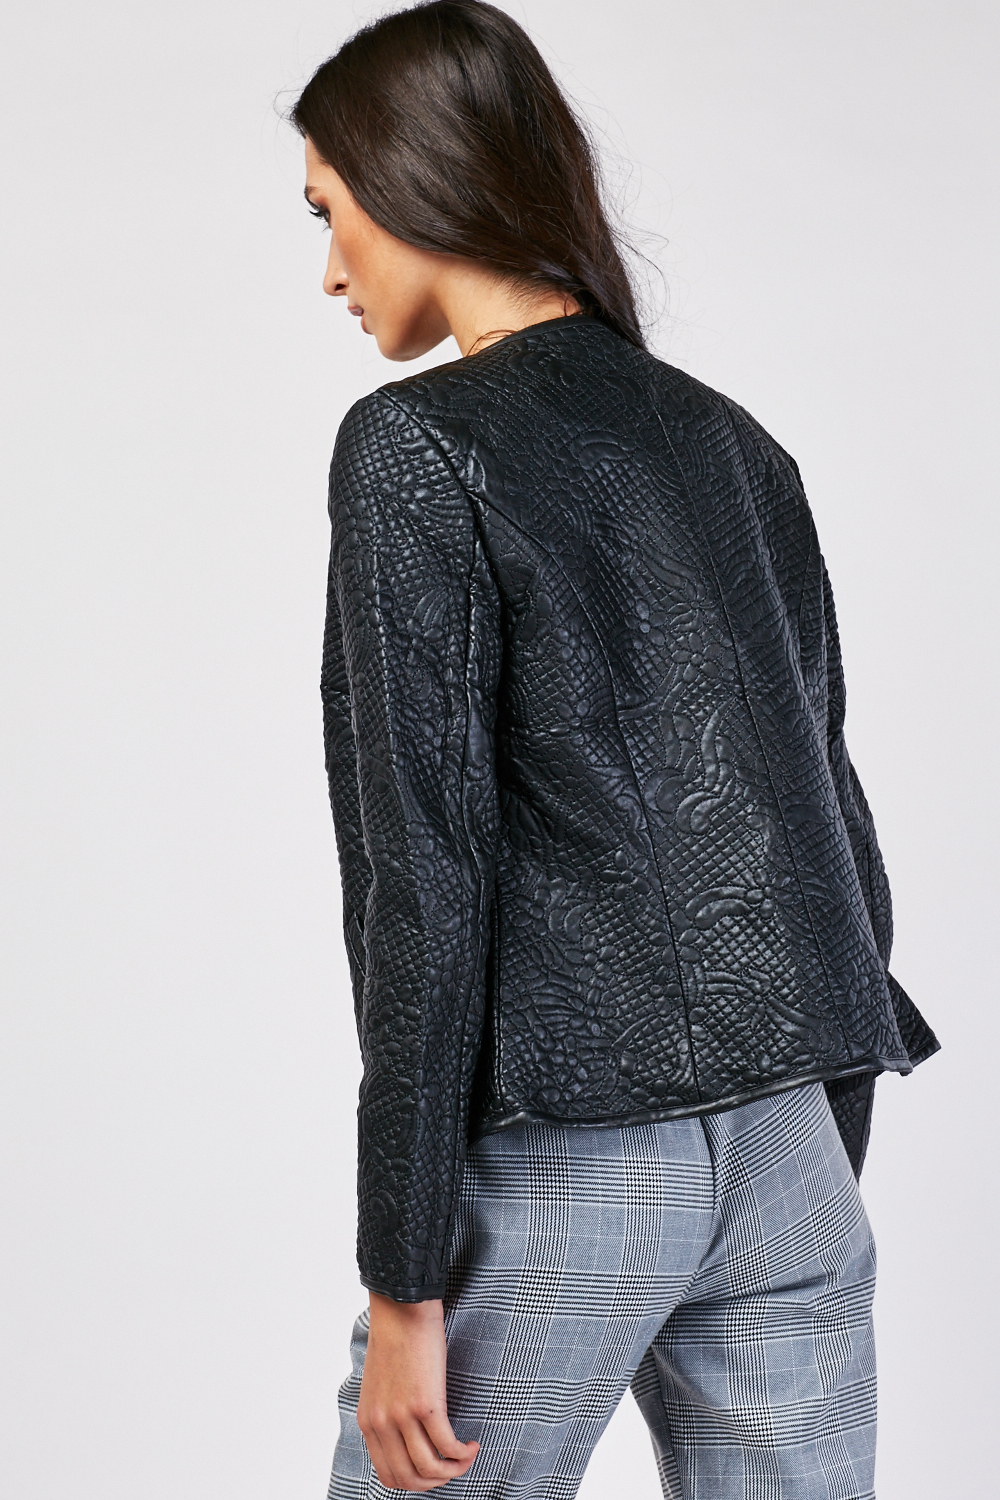 Flower Stitched Embossed Jacket - Just $7